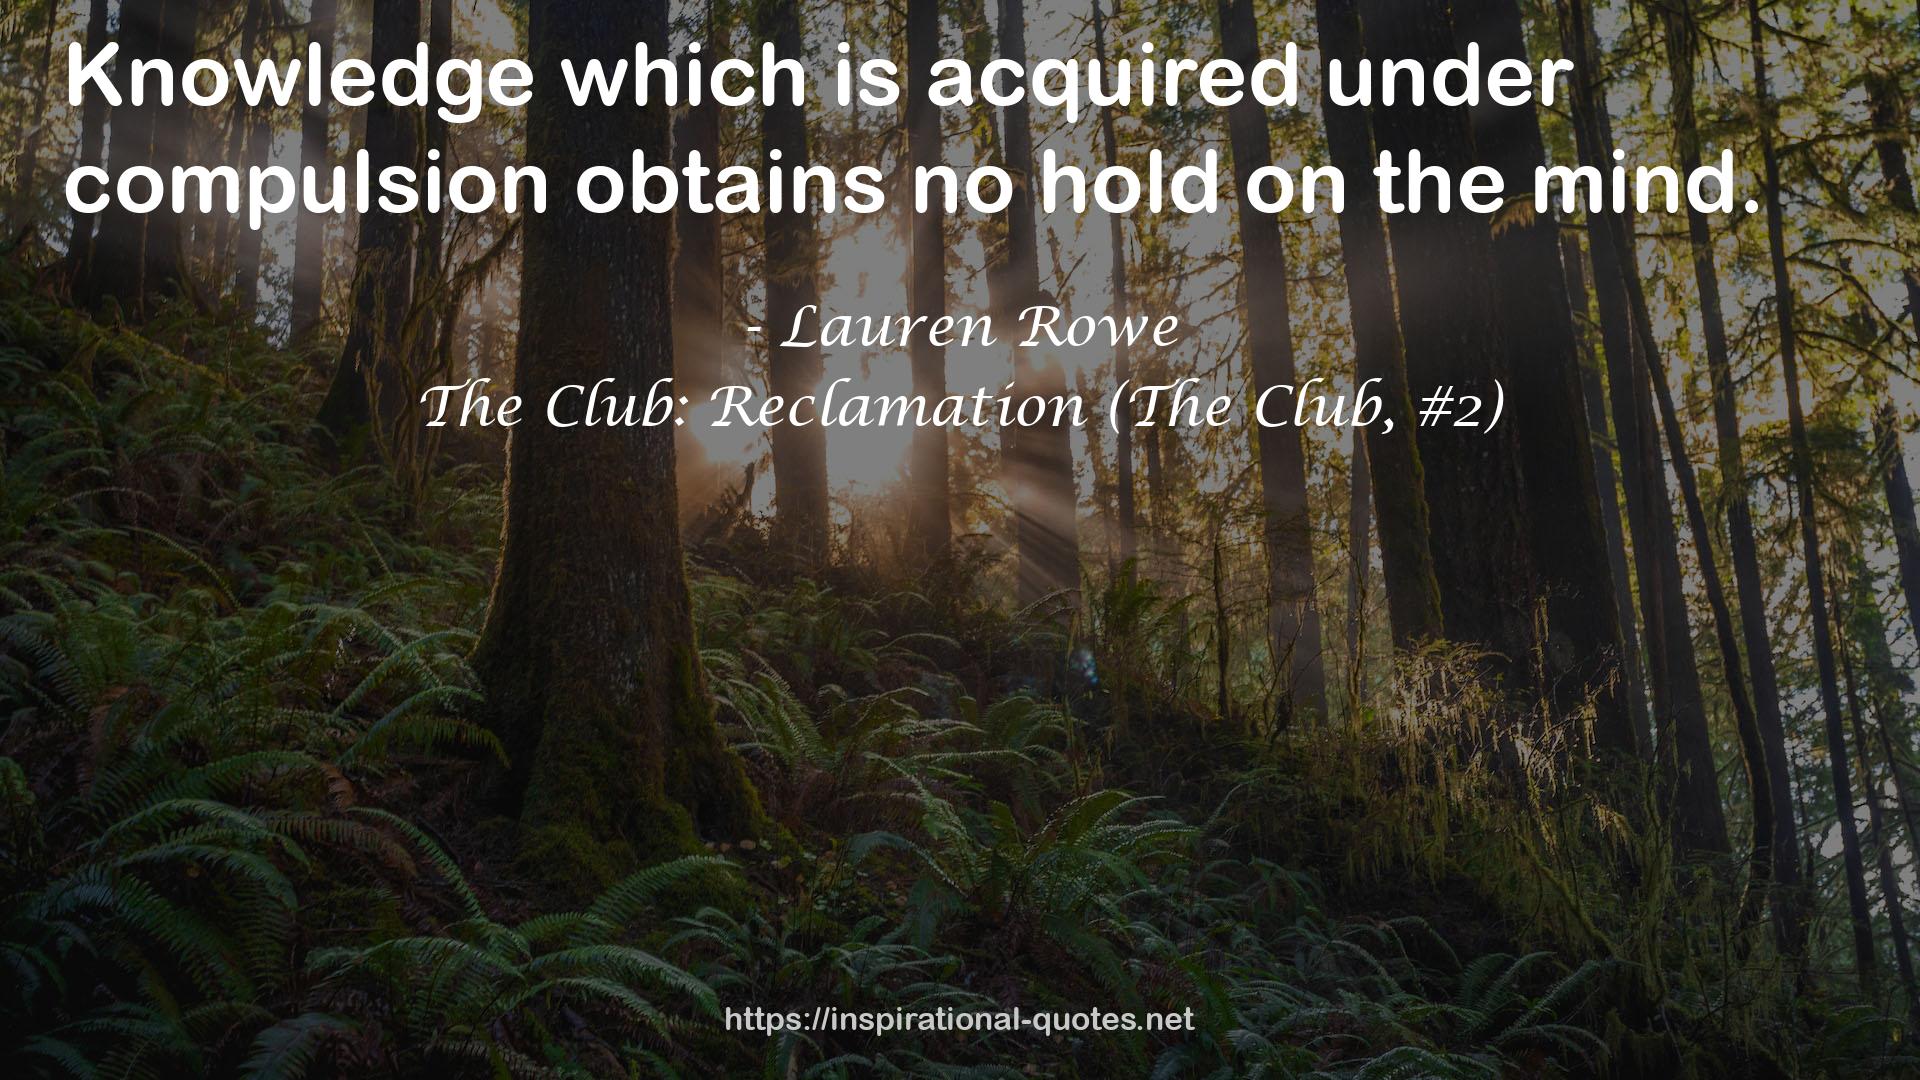 The Club: Reclamation (The Club, #2) QUOTES